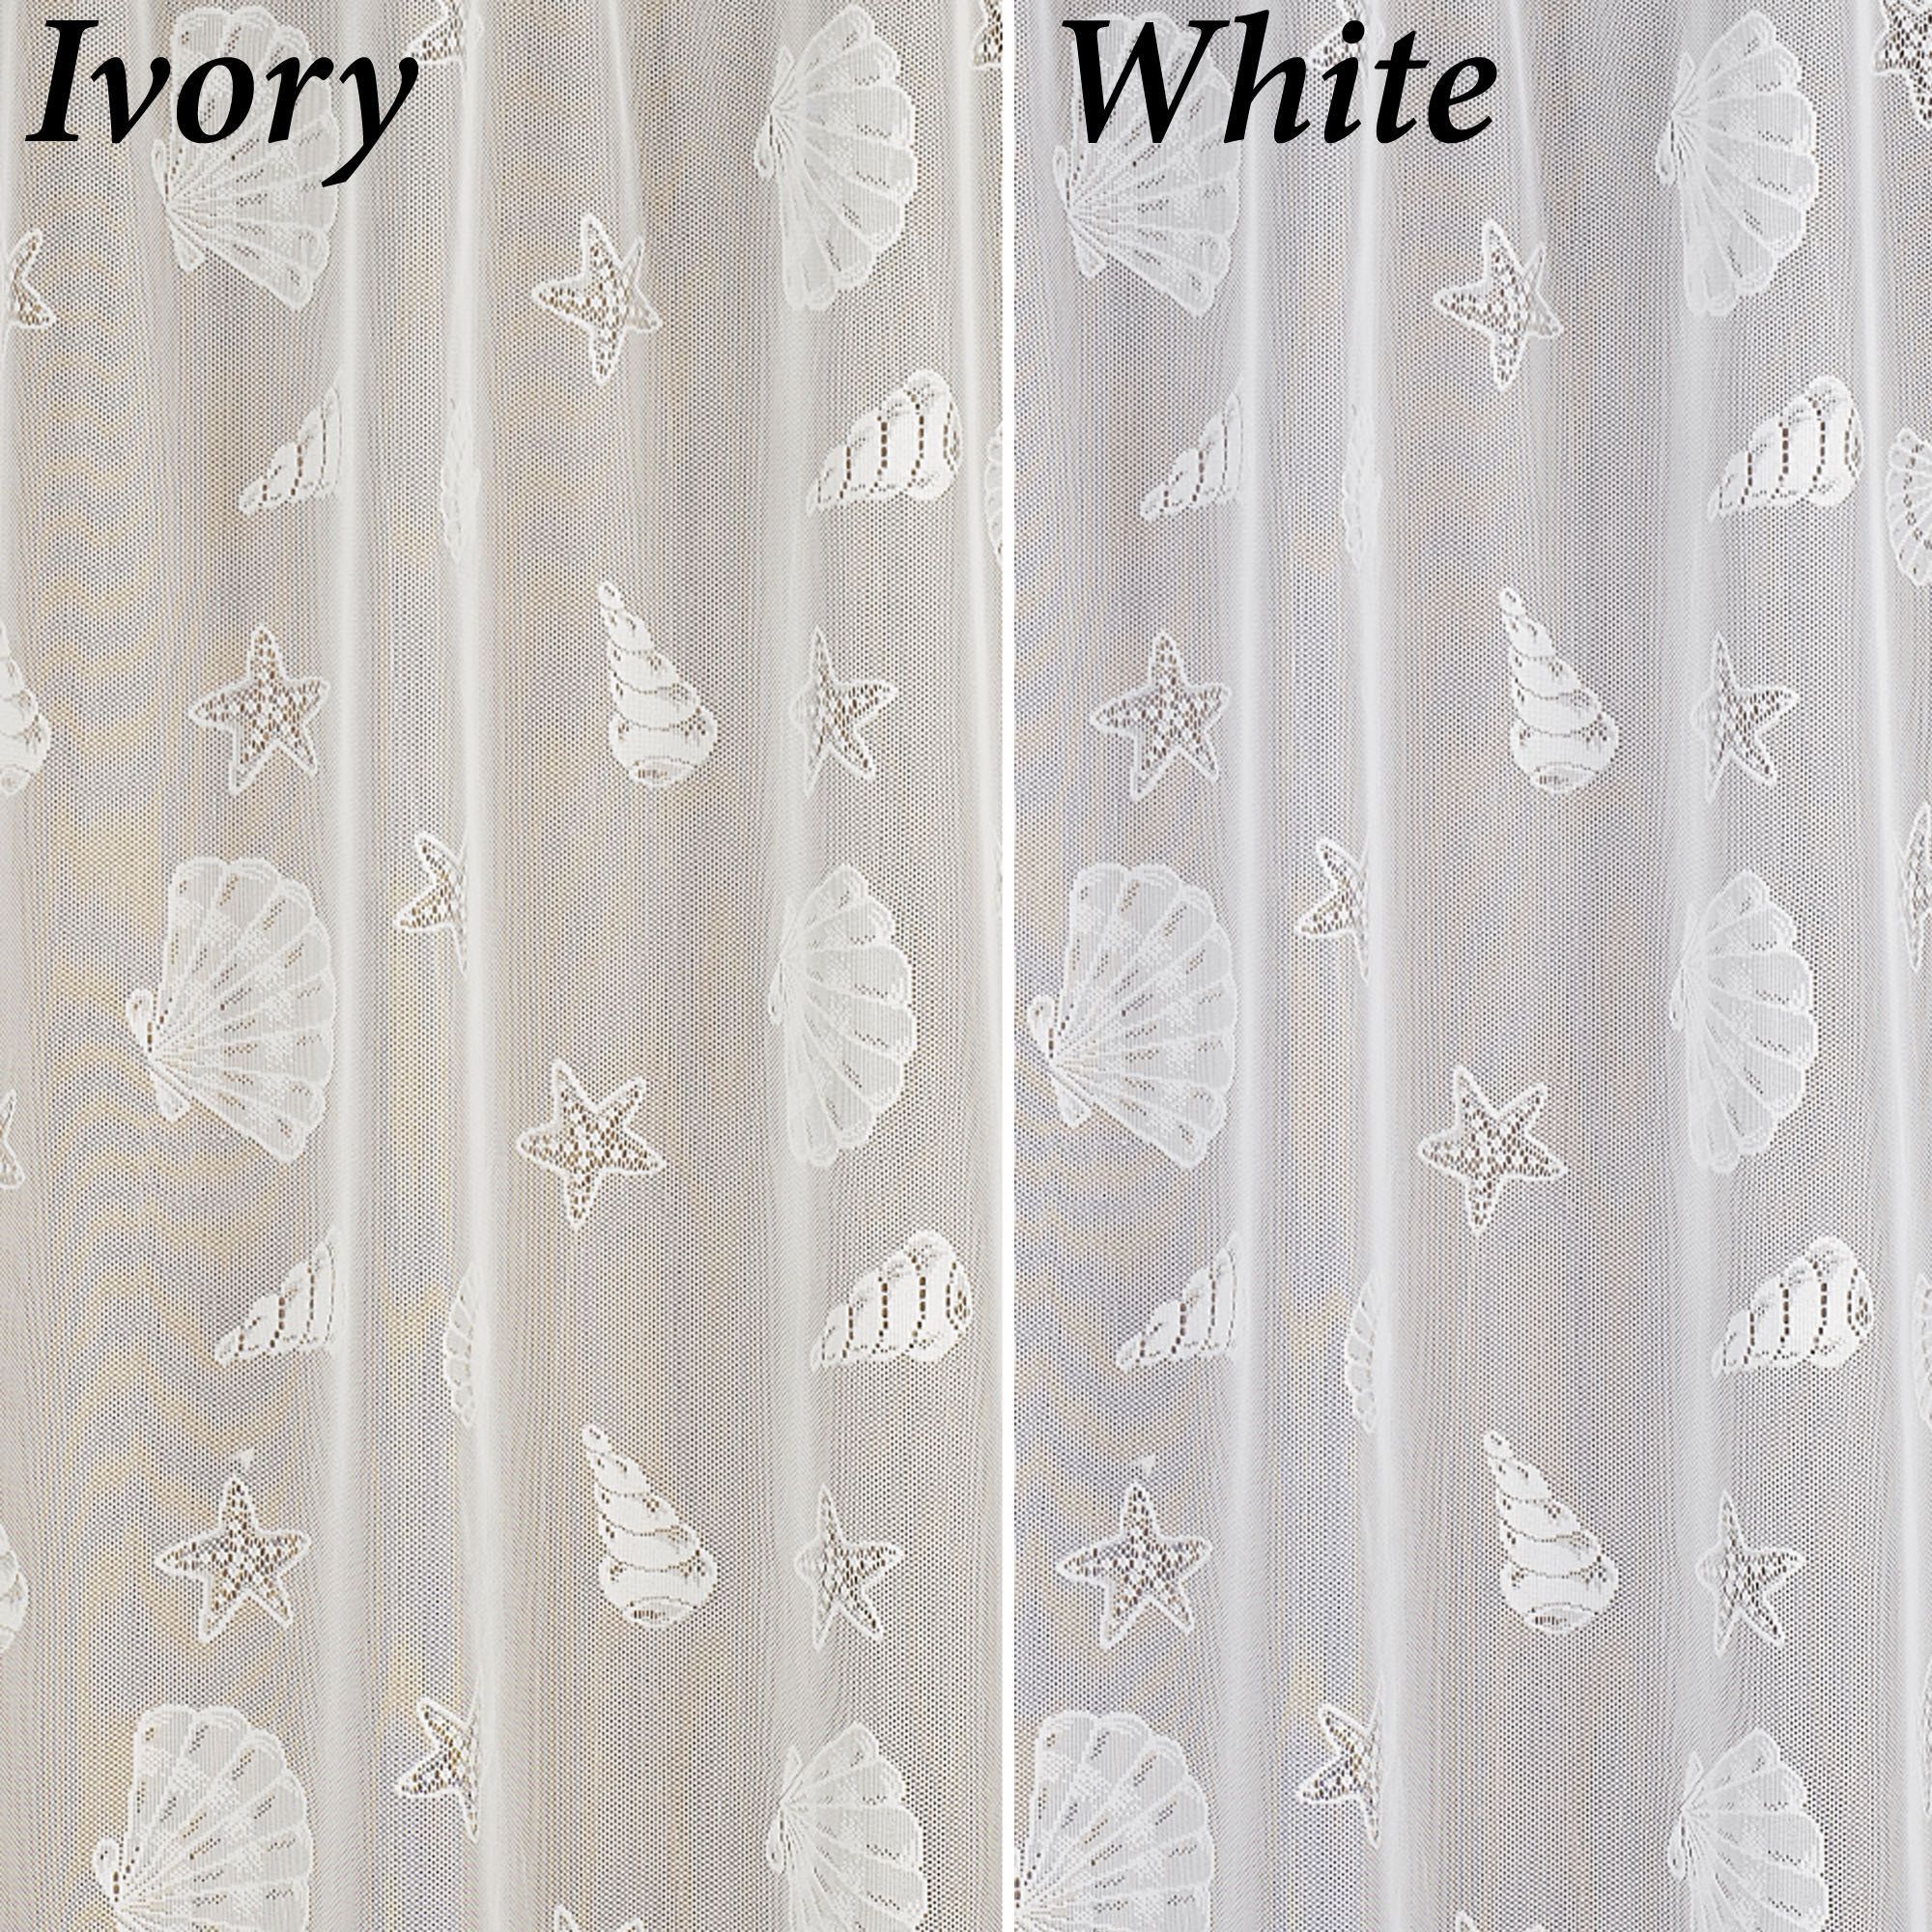 Seashells Lace Shower Curtain | Lace Shower Curtains, Vinyl With Marine Life Motif Knitted Lace Window Curtain Pieces (Photo 12 of 20)